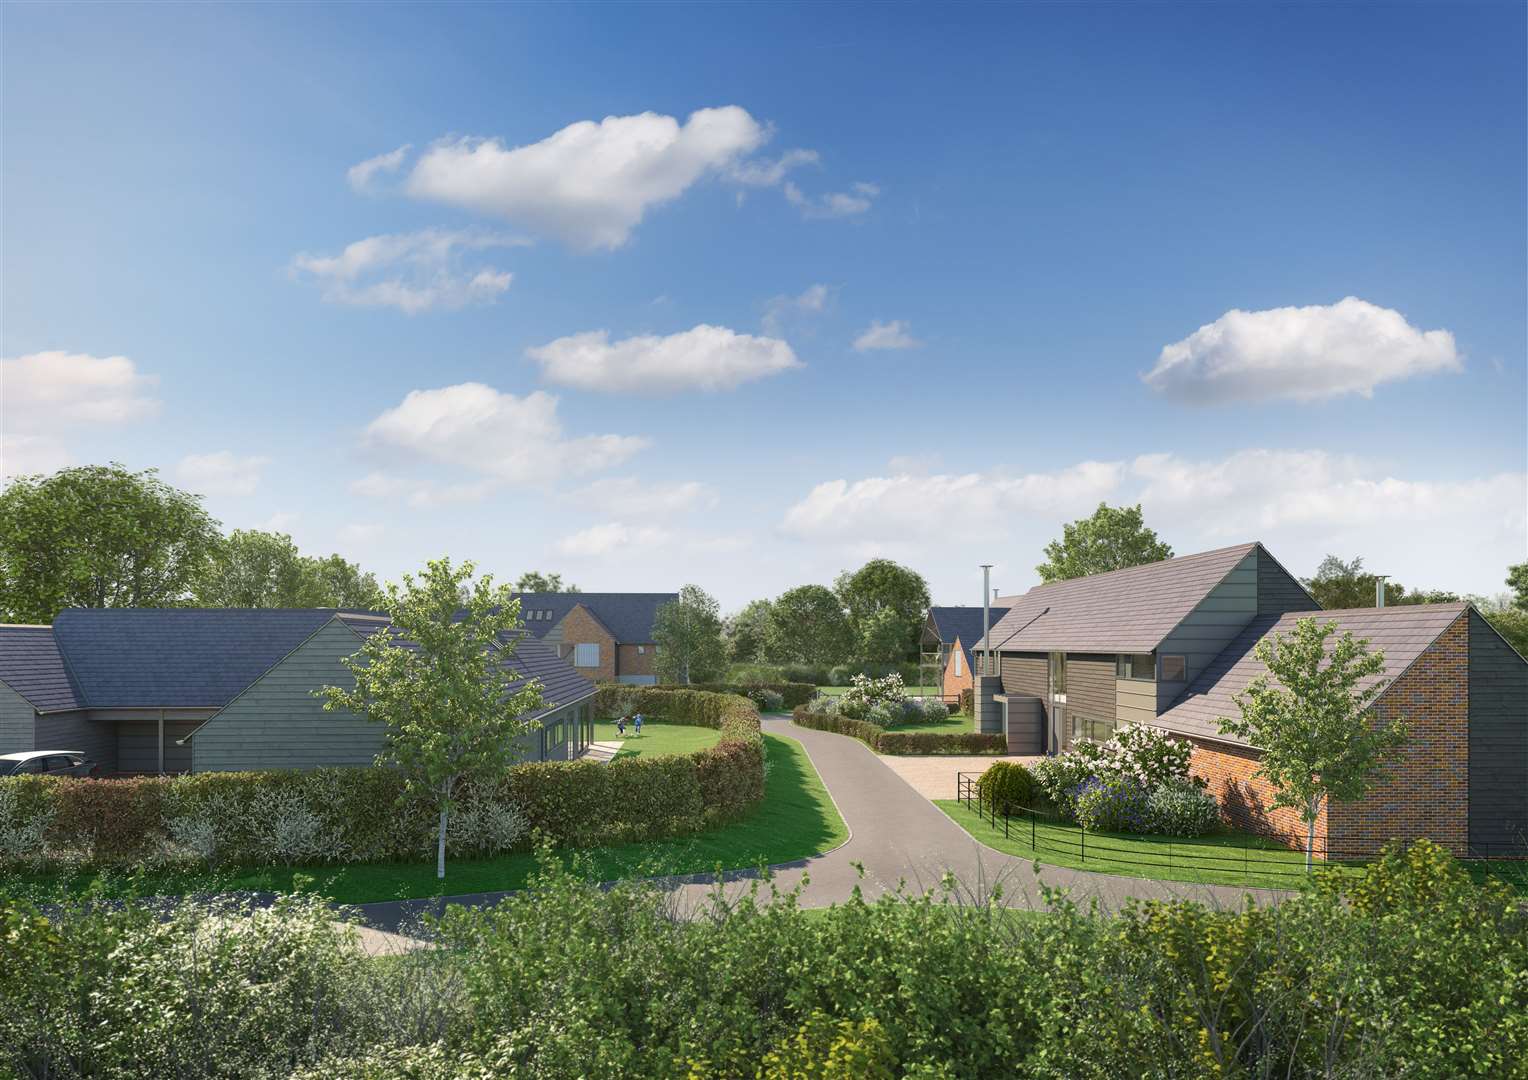 An artist's impression of how the development at Wickhambreaux will look